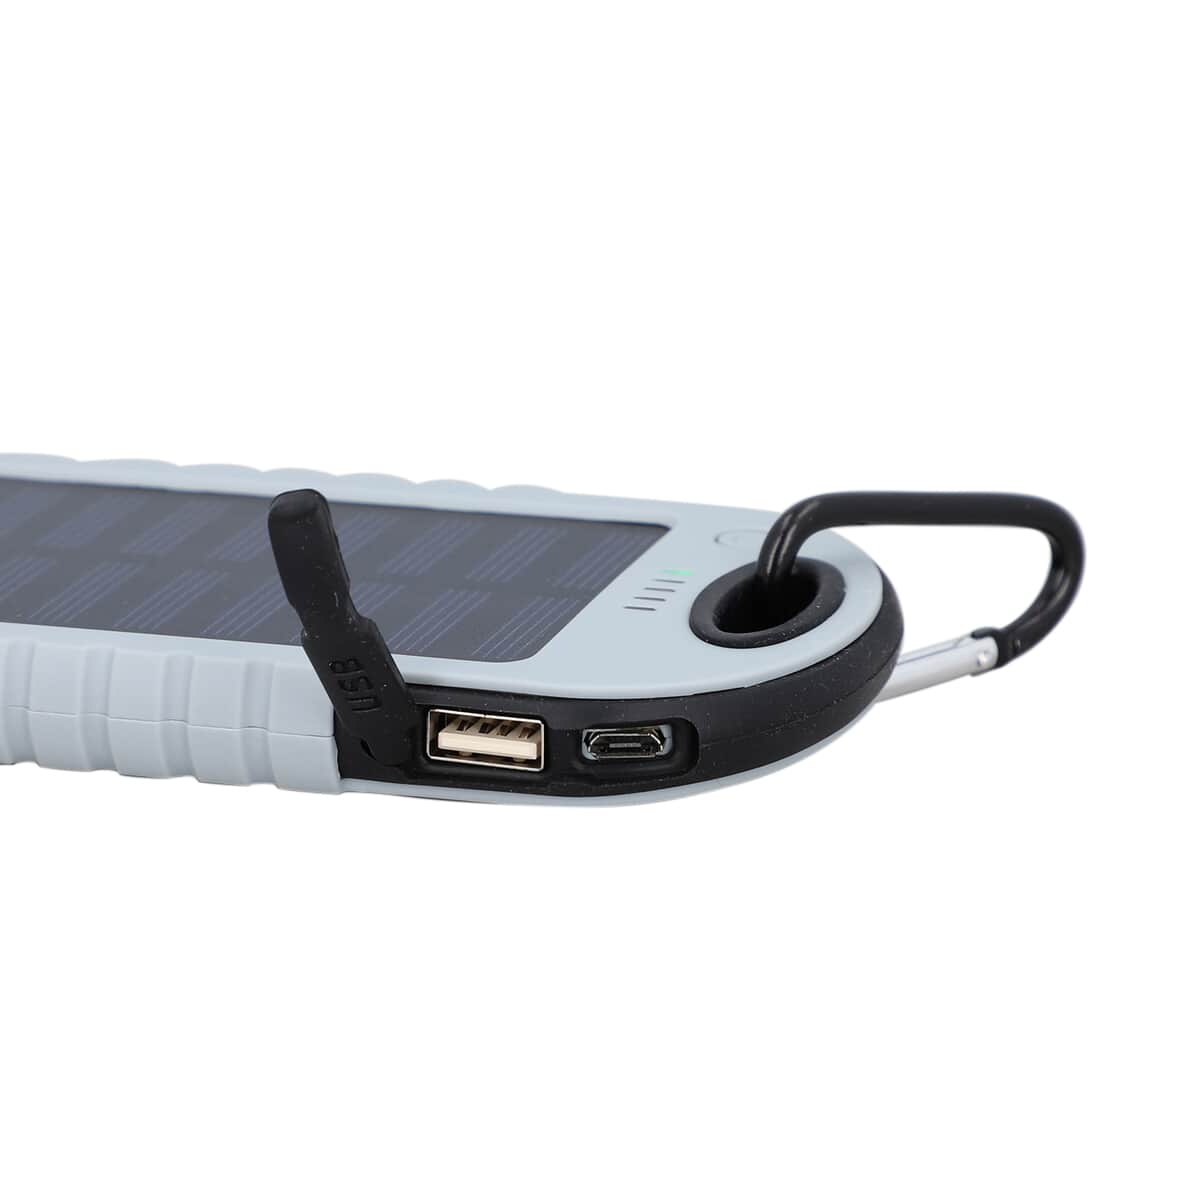 Homesmart Grey Carabiner Solar 5000 mAh Battery Charger with USB & Emergency LED Torch image number 5